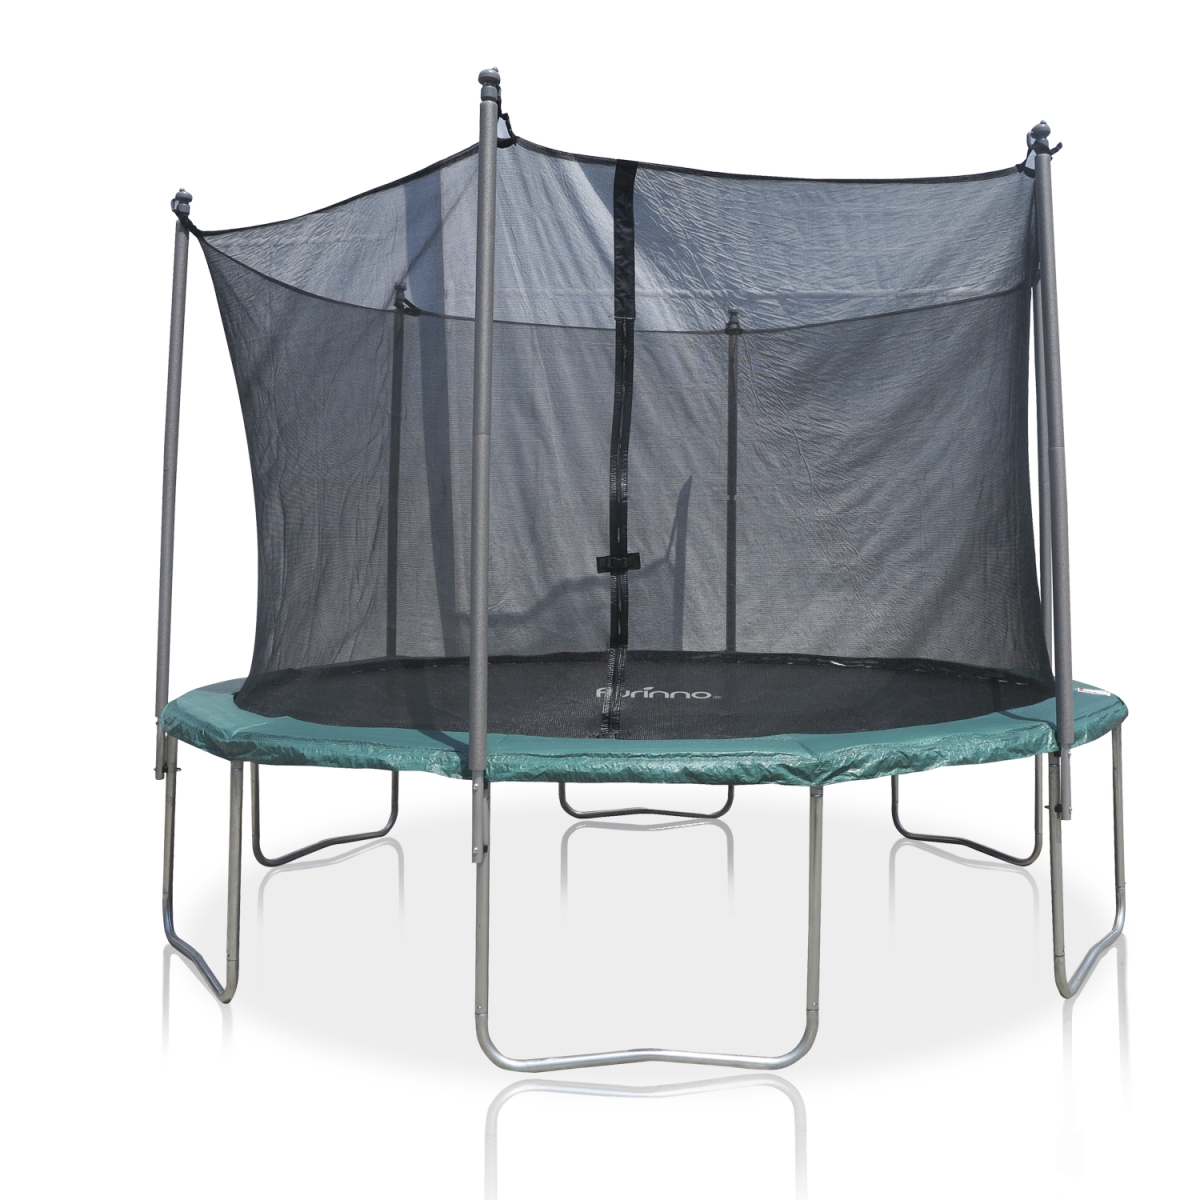 12 Ft. Trampoline With 6 Legs & 6 Poles Enclosure